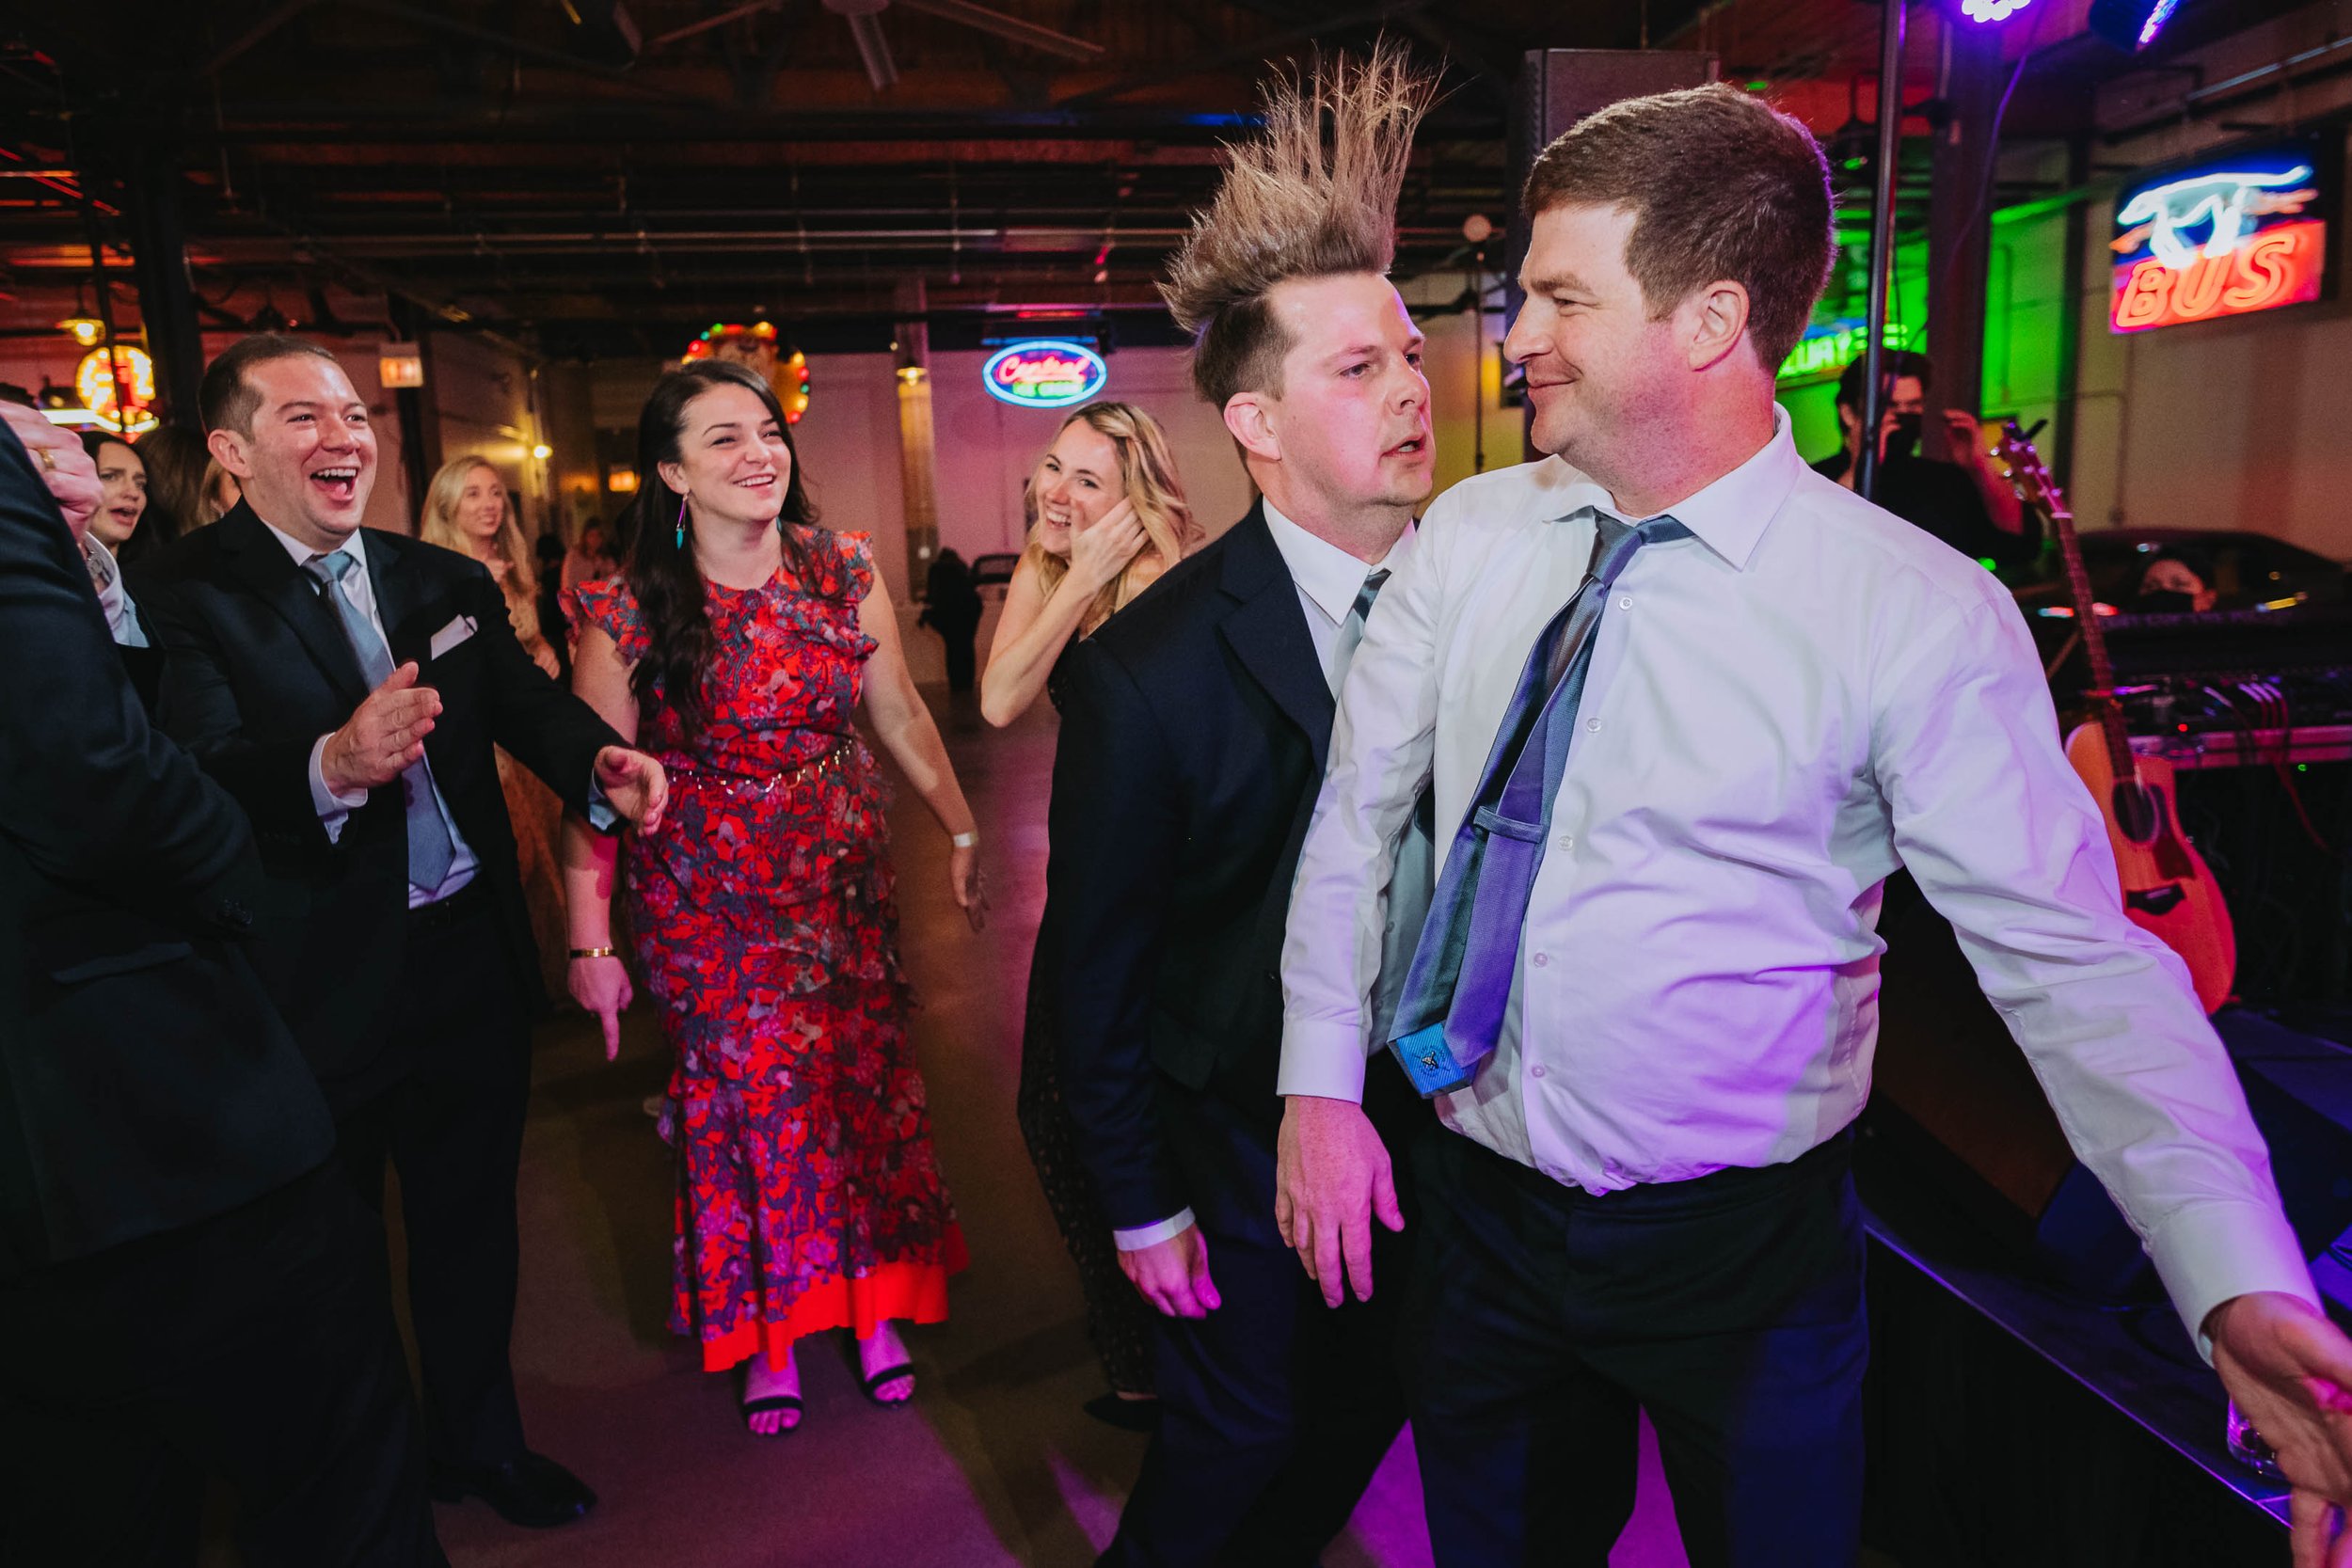 Wedding Day Photos | Ravenswood Event Center | J. Brown Photography | funny moment of guest on dance floor